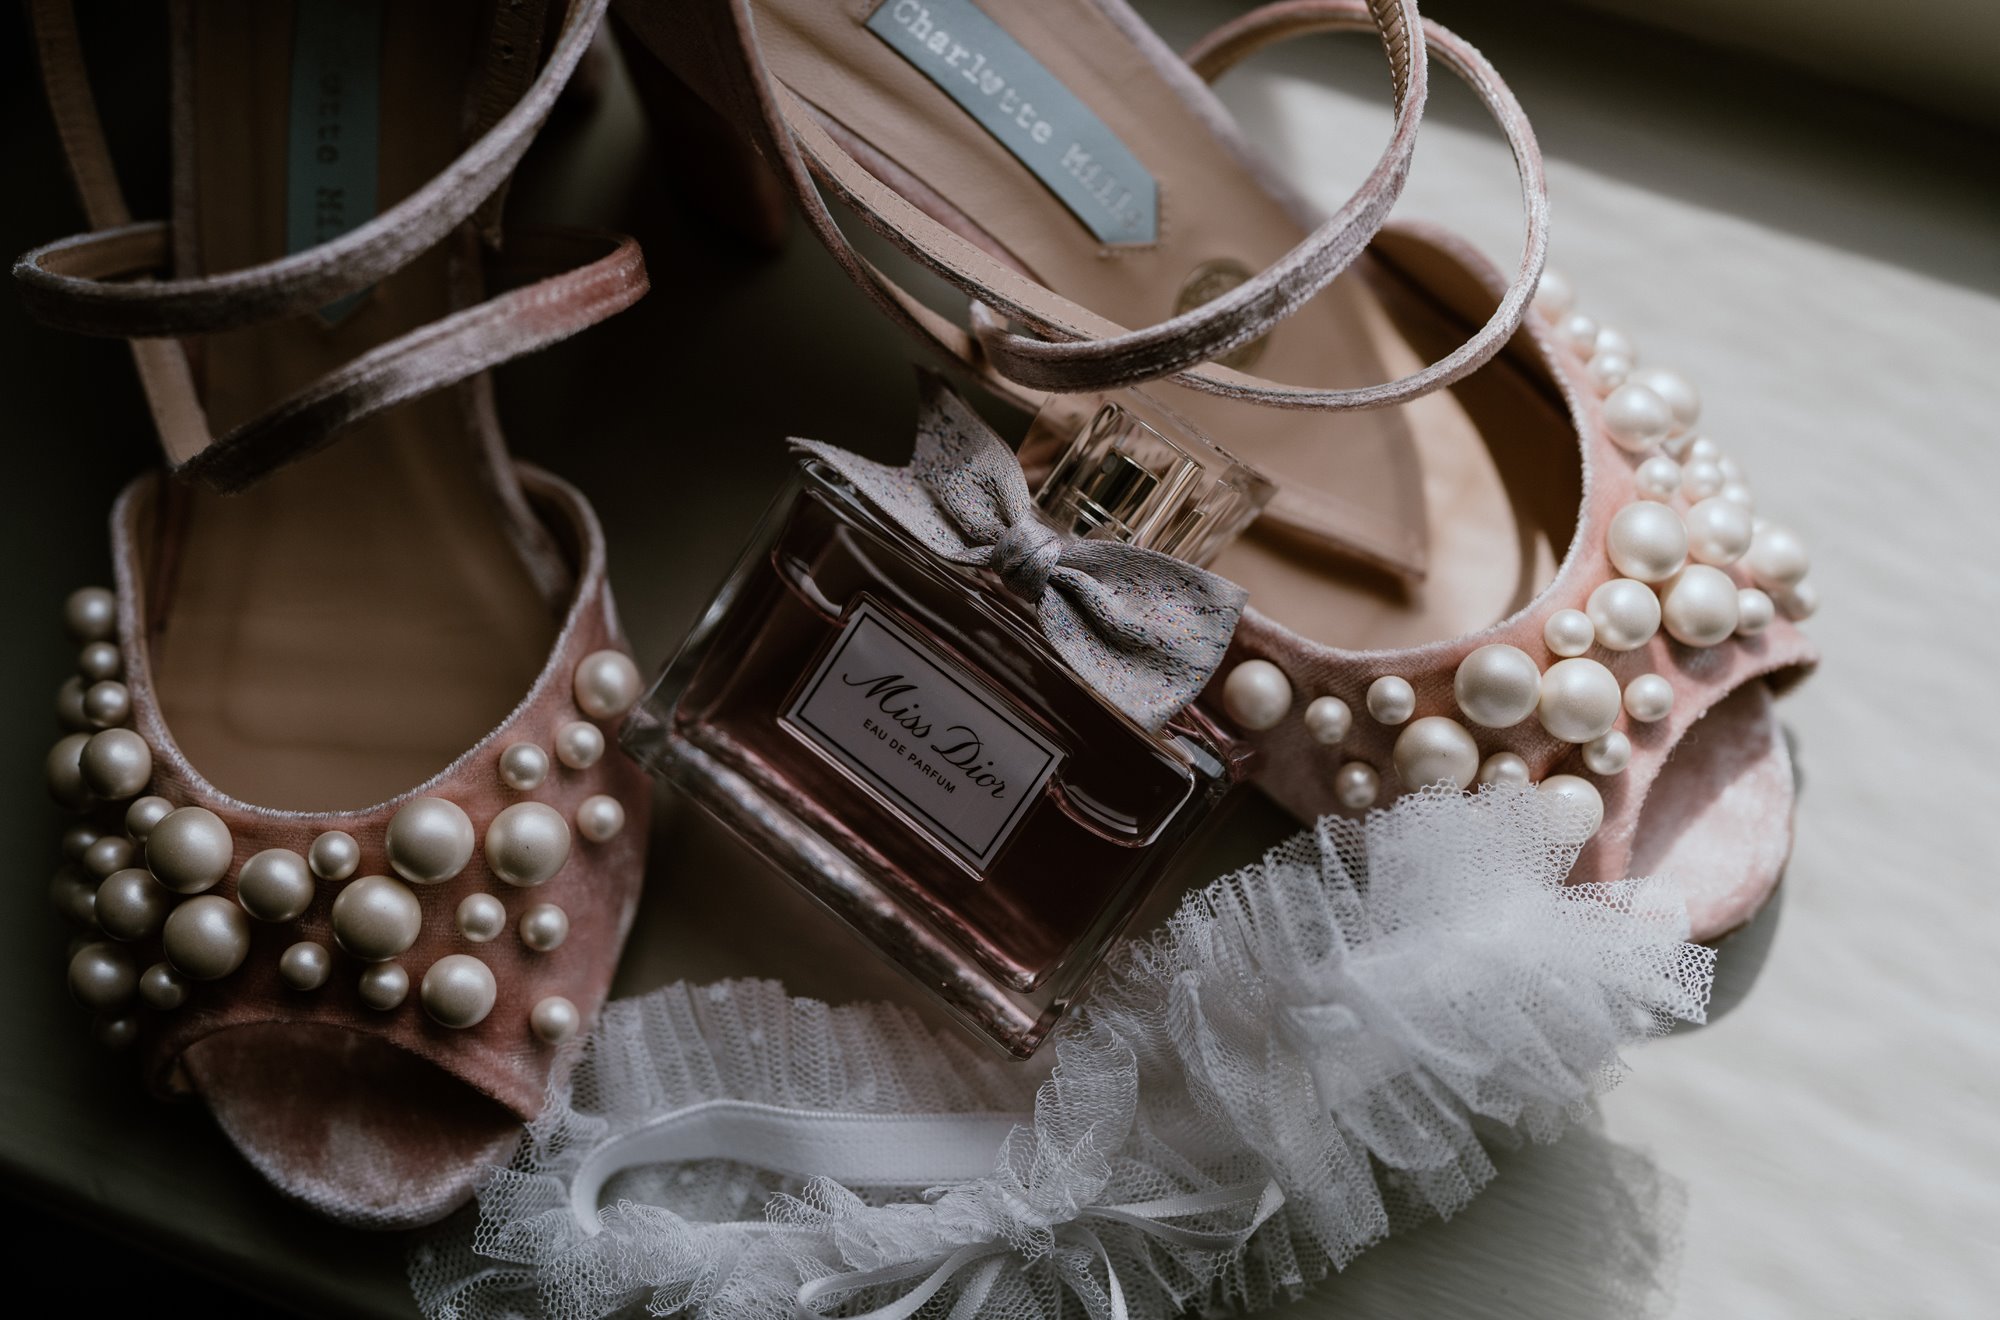 stunning bridal accessories including heels adorned with pearls, sweet fragrances and a lacy wedding garter